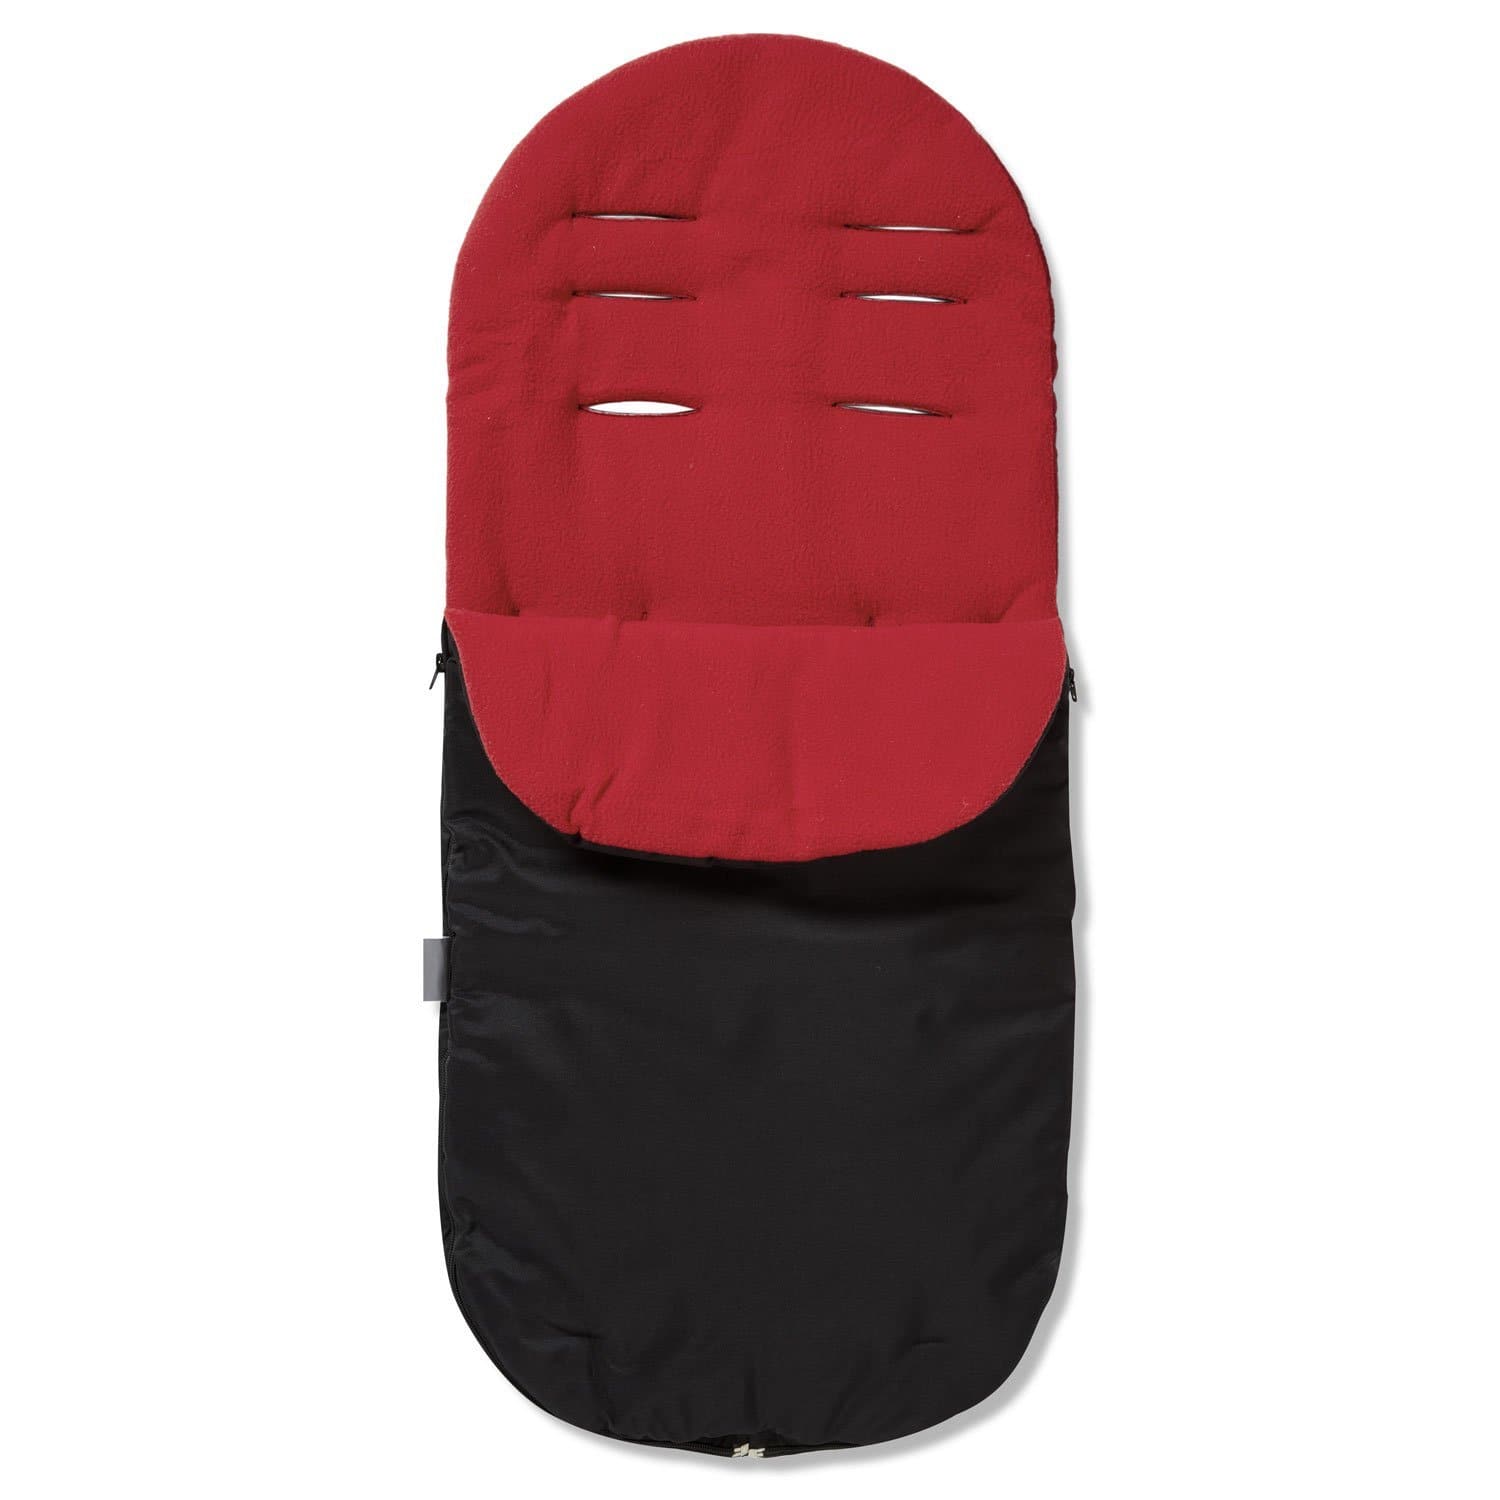 Footmuff / Cosy Toes Compatible with Mothercare - Red / Fits All Models | For Your Little One